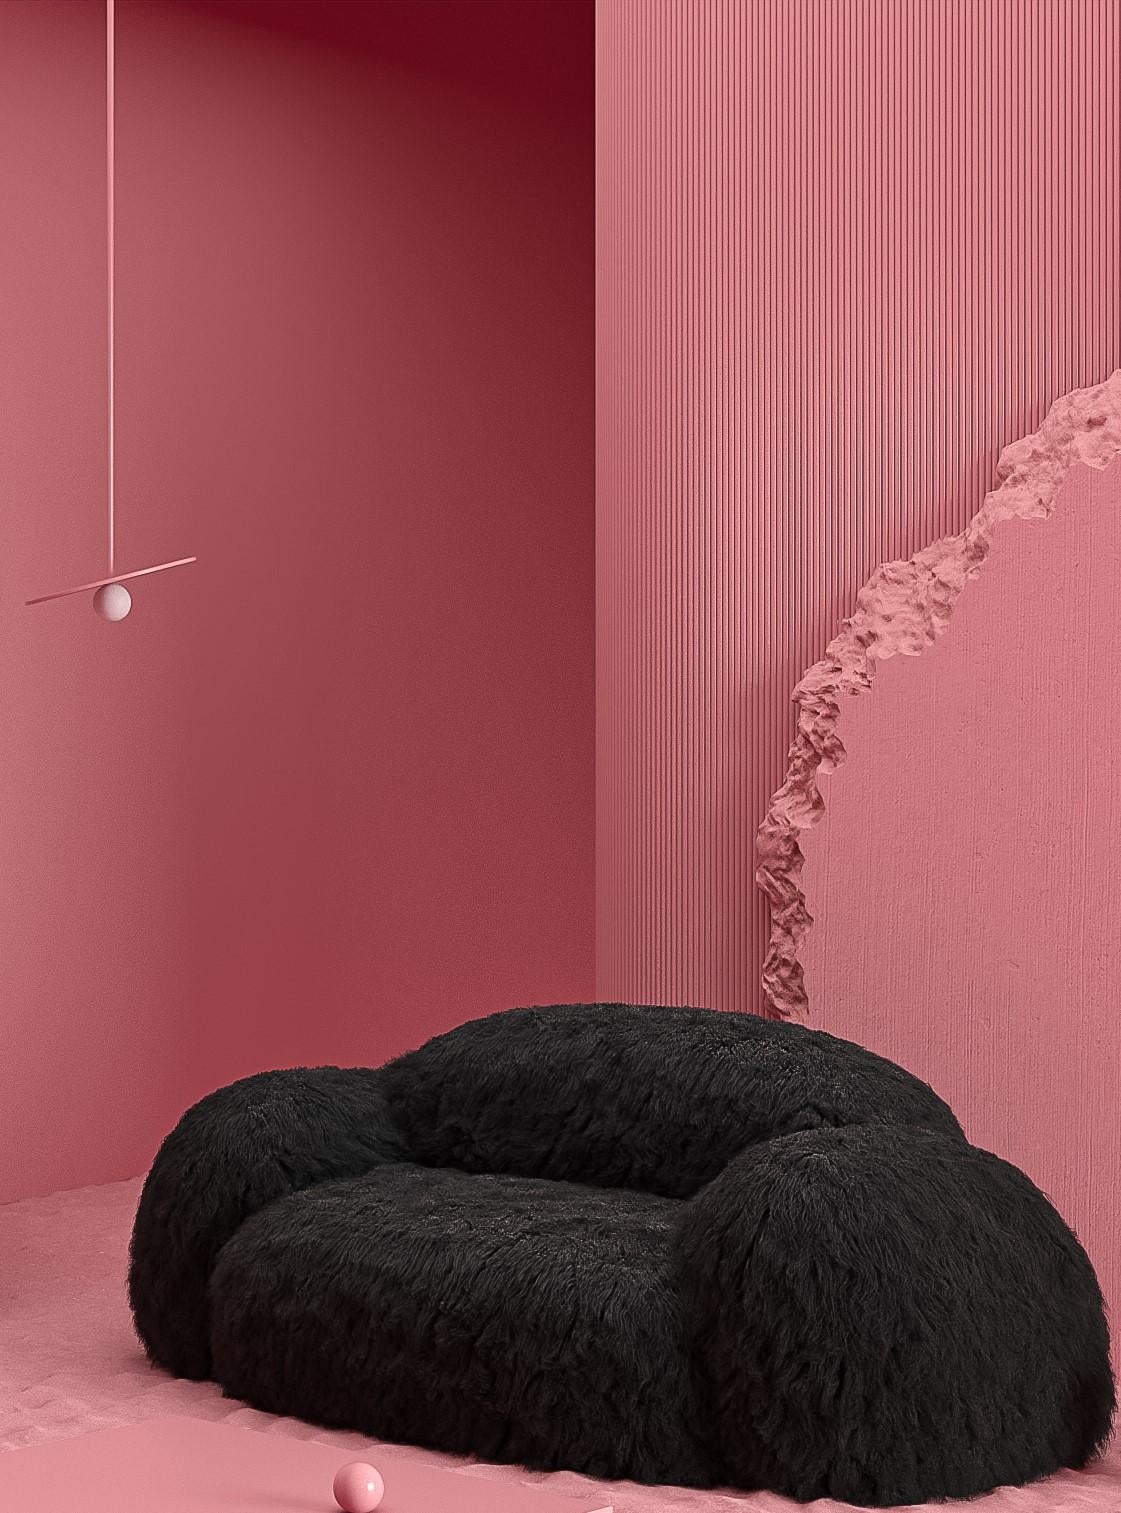 Yeti sofa by Vladimir Naumov
Dimensions: H 80 x W 210 x L 110 cm
Materials: Faux Lama Fur

Yeti furniture series – minimalistic and huge, a soft and cozy pink cloud. Its bloated forms seem to cover you with a feeling of comfort, while the faux